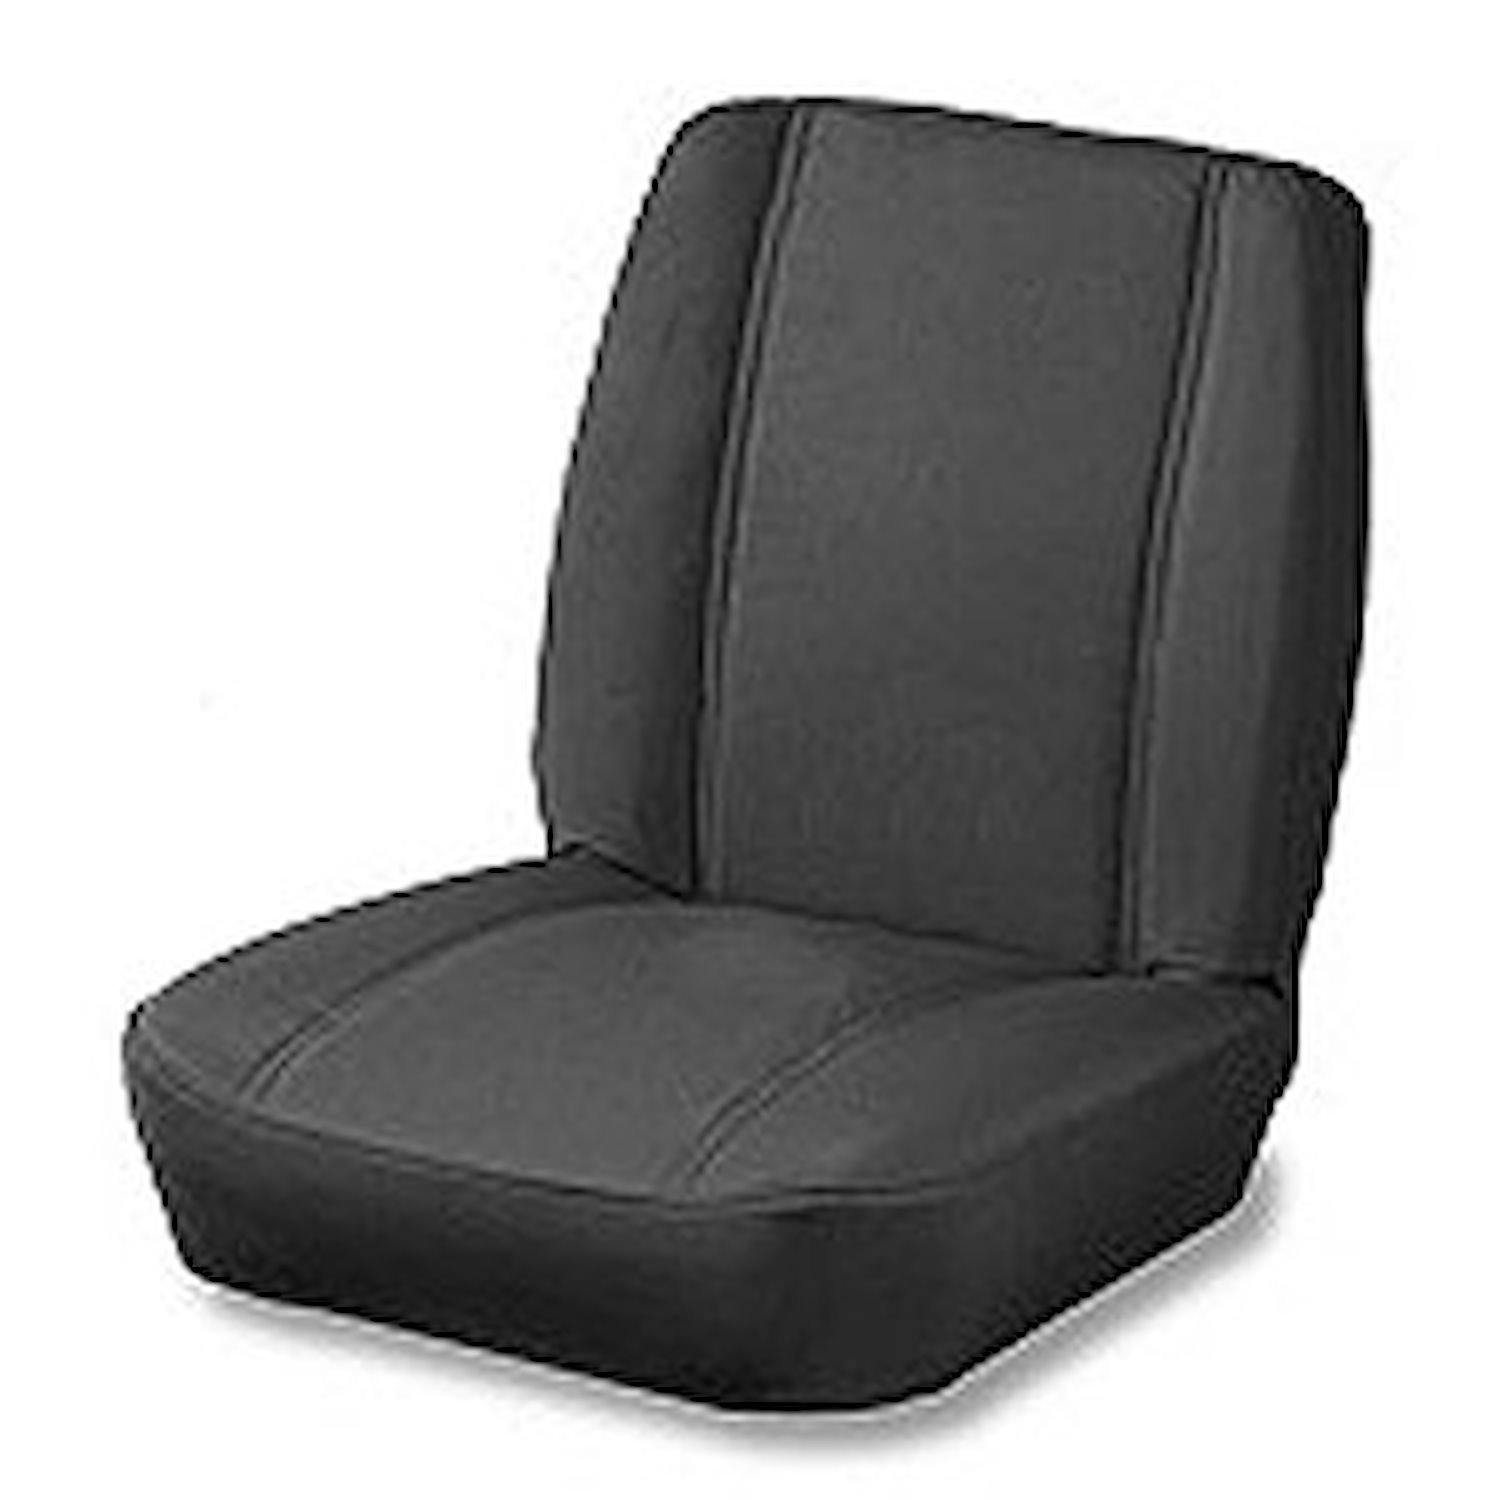 Trailmax II Classic Seat, Spice, Front, Low-Back, Vinyl, Bucket,Fits Factory Seats, Requires Seat Adapter PN[51256-01] Per Seat,